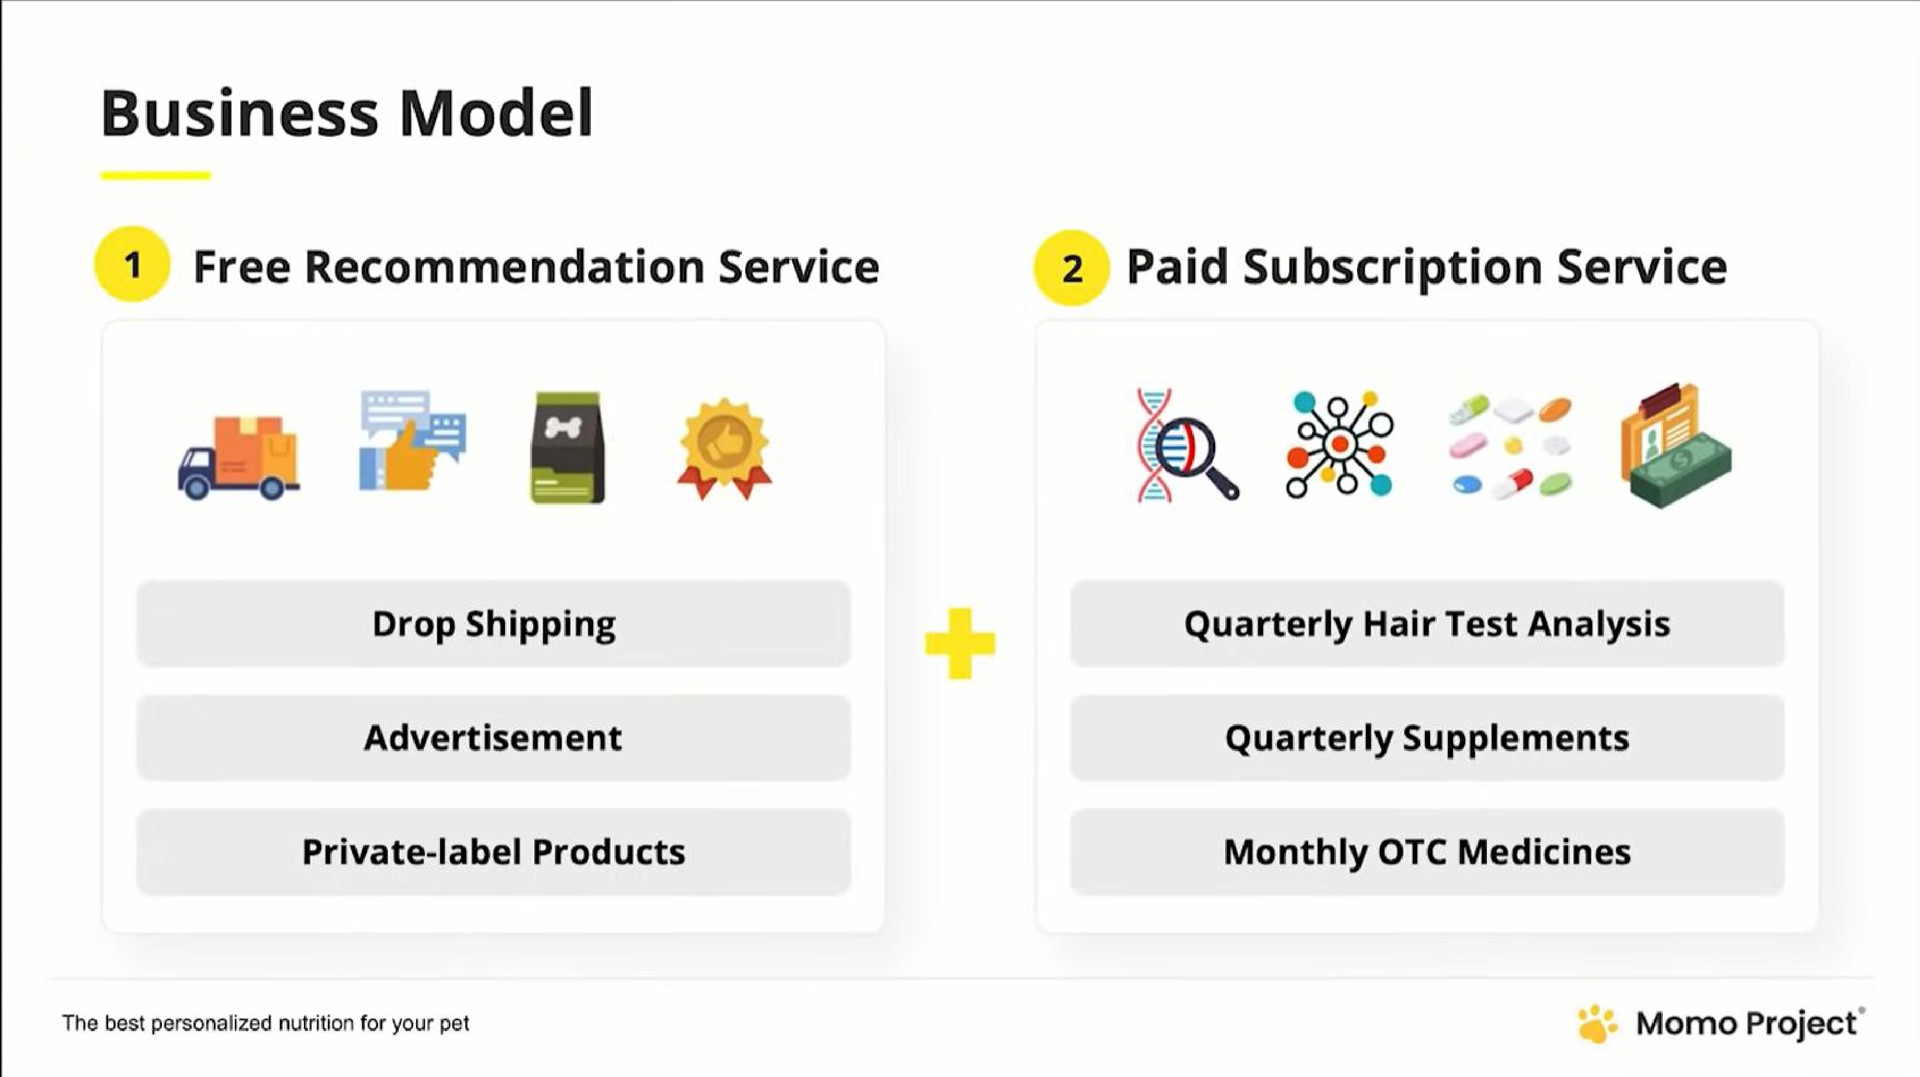 business model paid subscription service | Momo Project